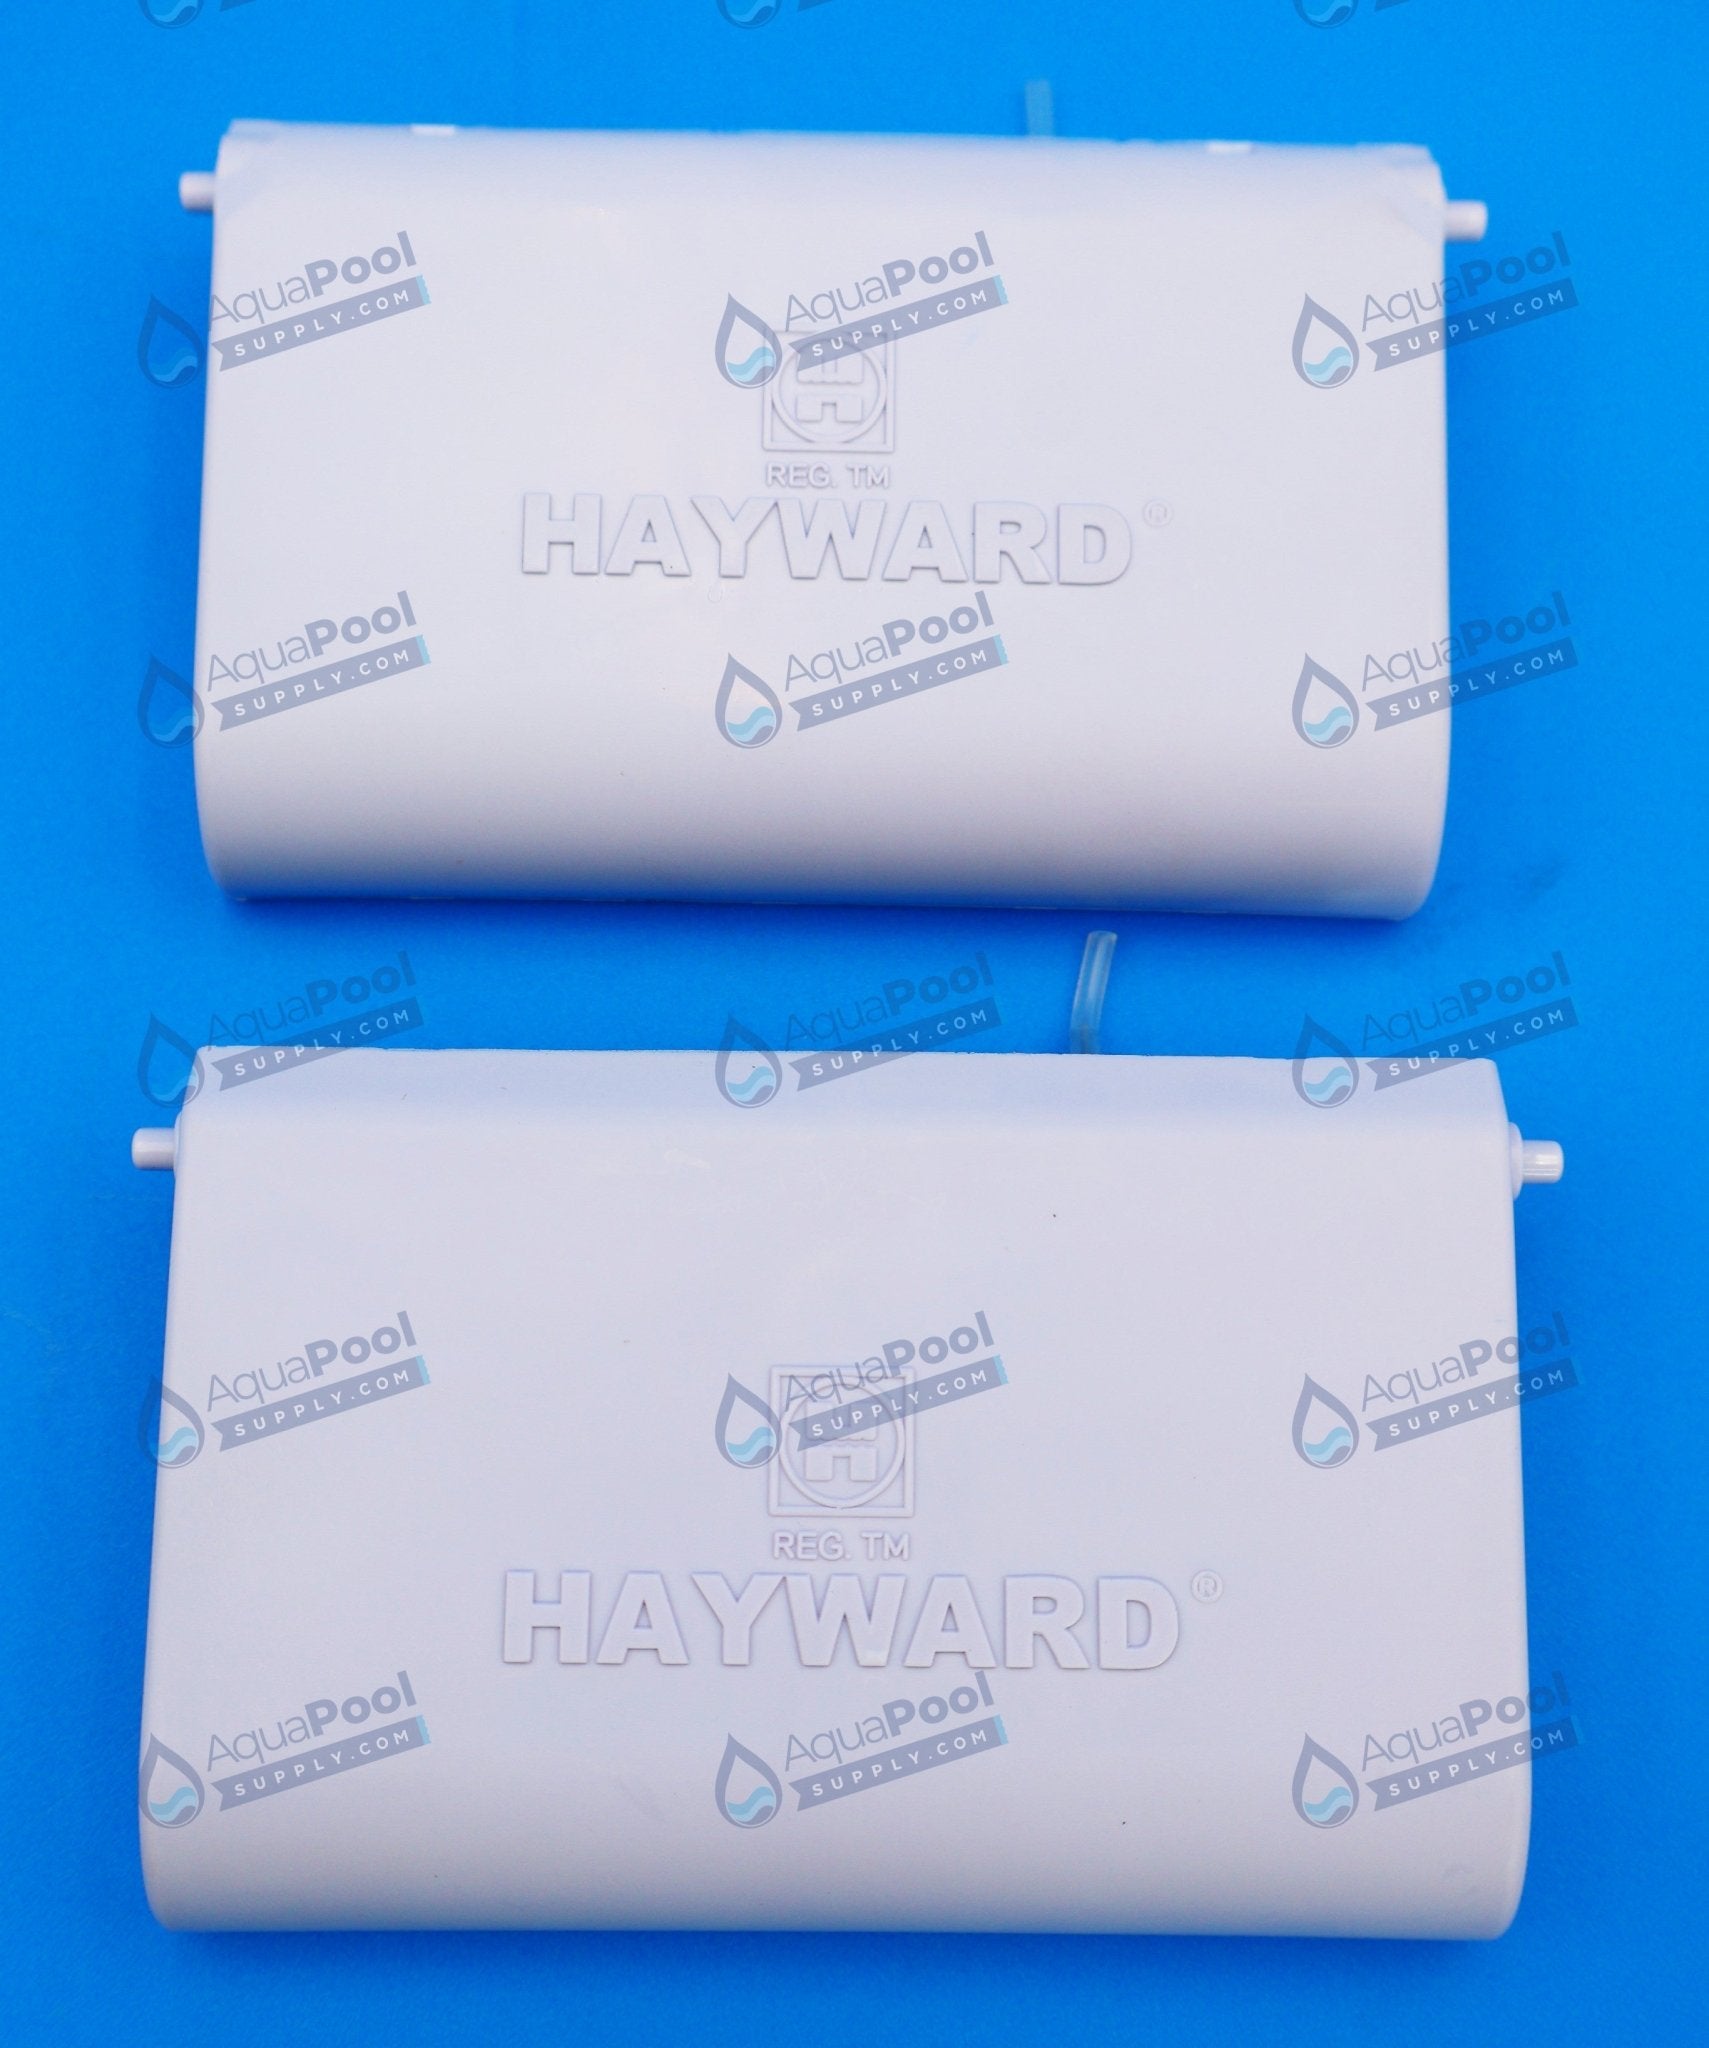 Hayward Flap Kit for PoolVac/Navigator V-Flex - Includes 2 Flaps and Front-Rear Springs AXV434-237 - img-1